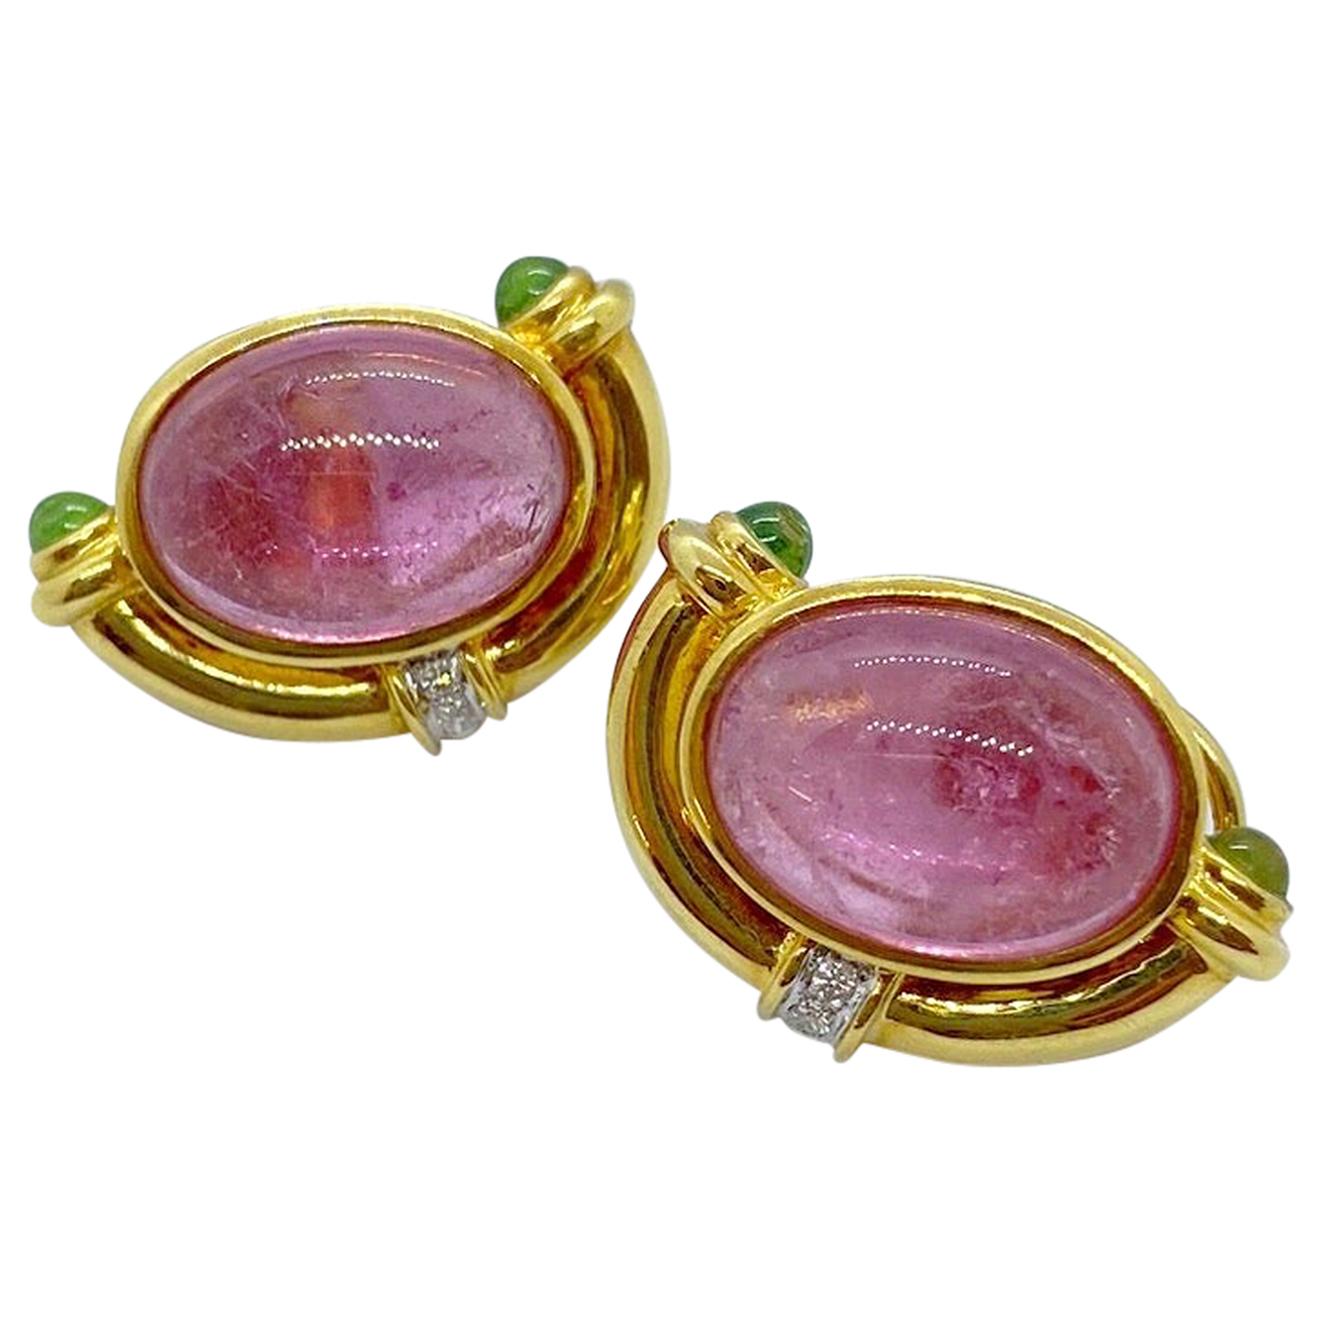 18 Karat Yellow Gold Earrings with Pink and Green Tourmaline, and Diamonds